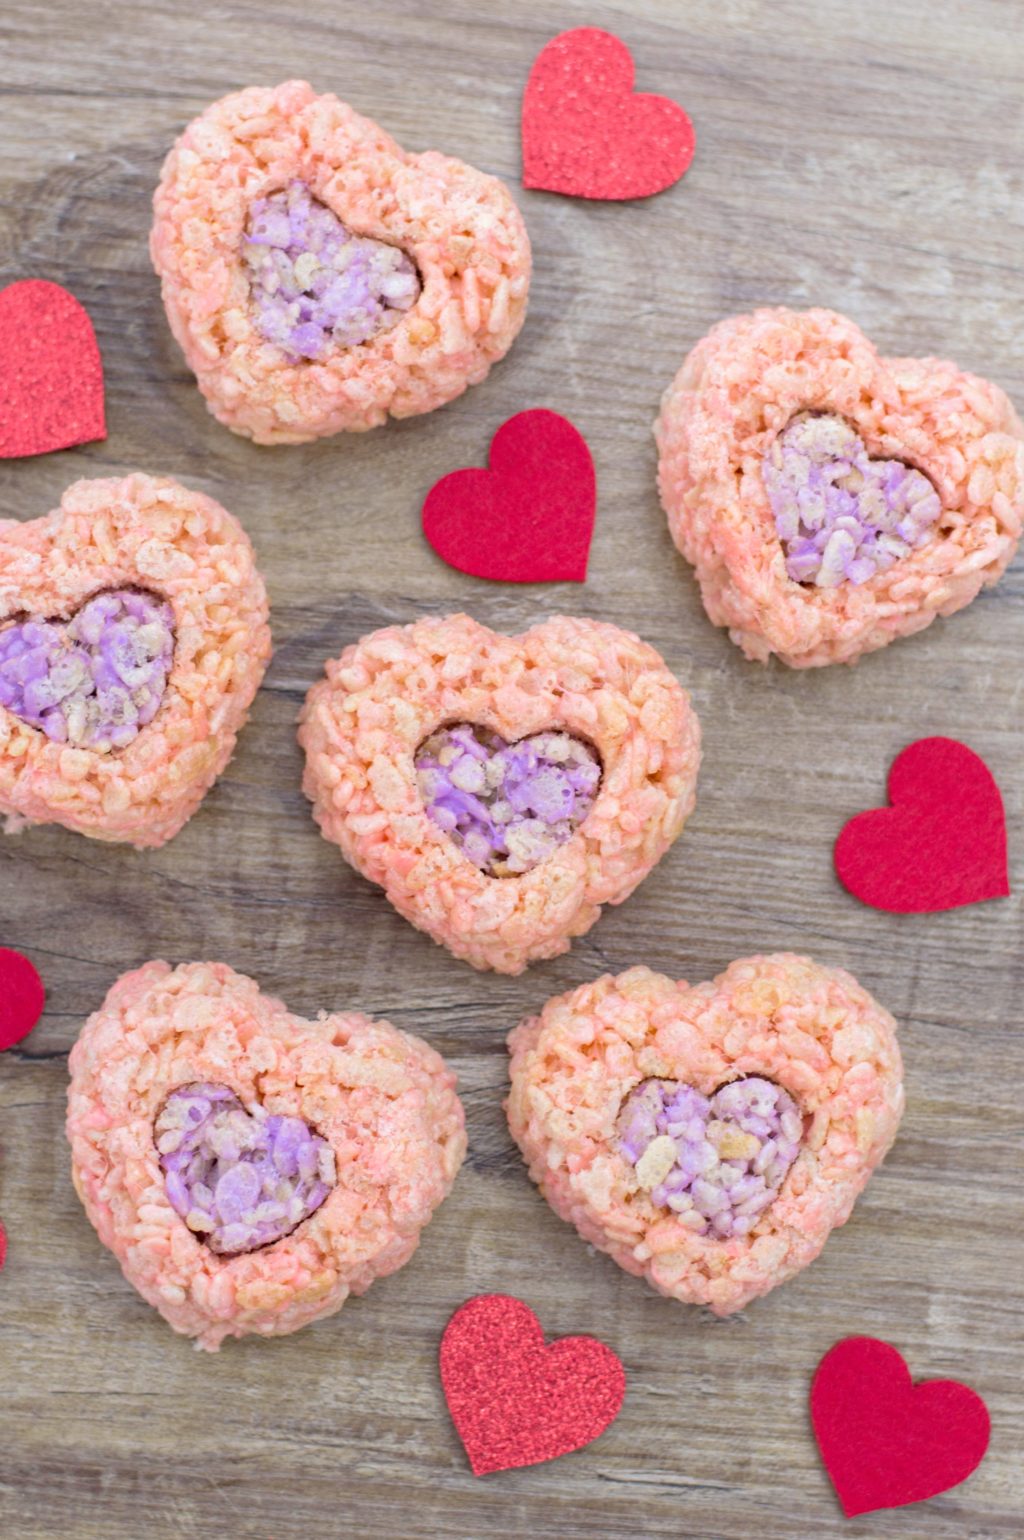 Valentine's rice cereal treats in shape of hearts on wood background with red hearts surrounding them.